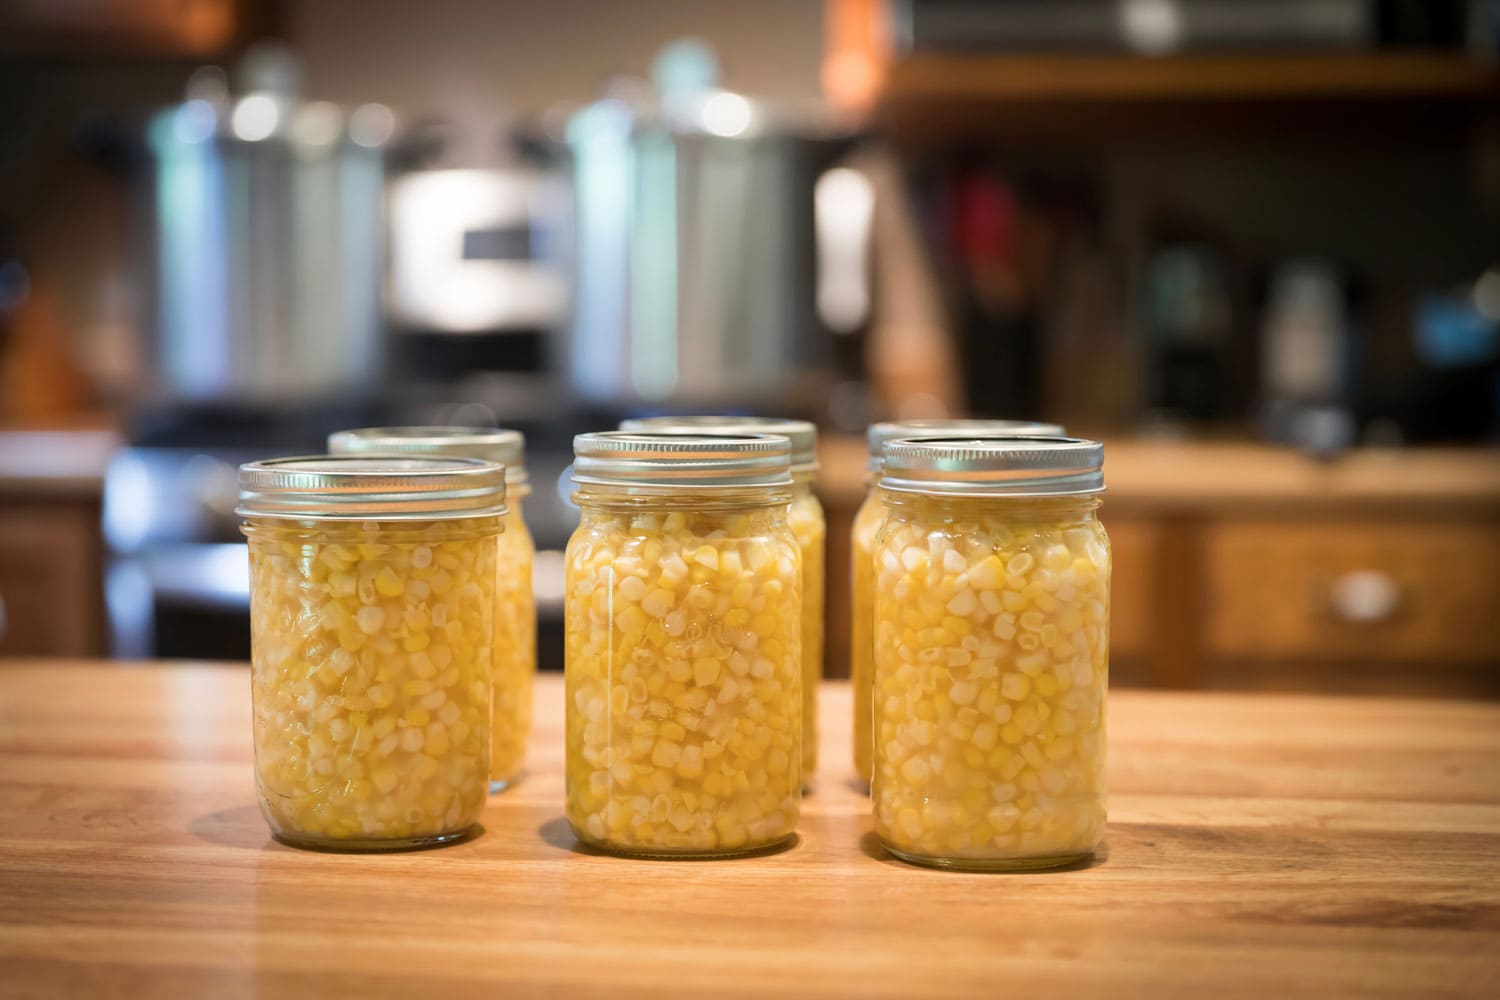 Pint jars of corn sitting on the counter ready to go in pressure canners that are sitting on the stove in the background.